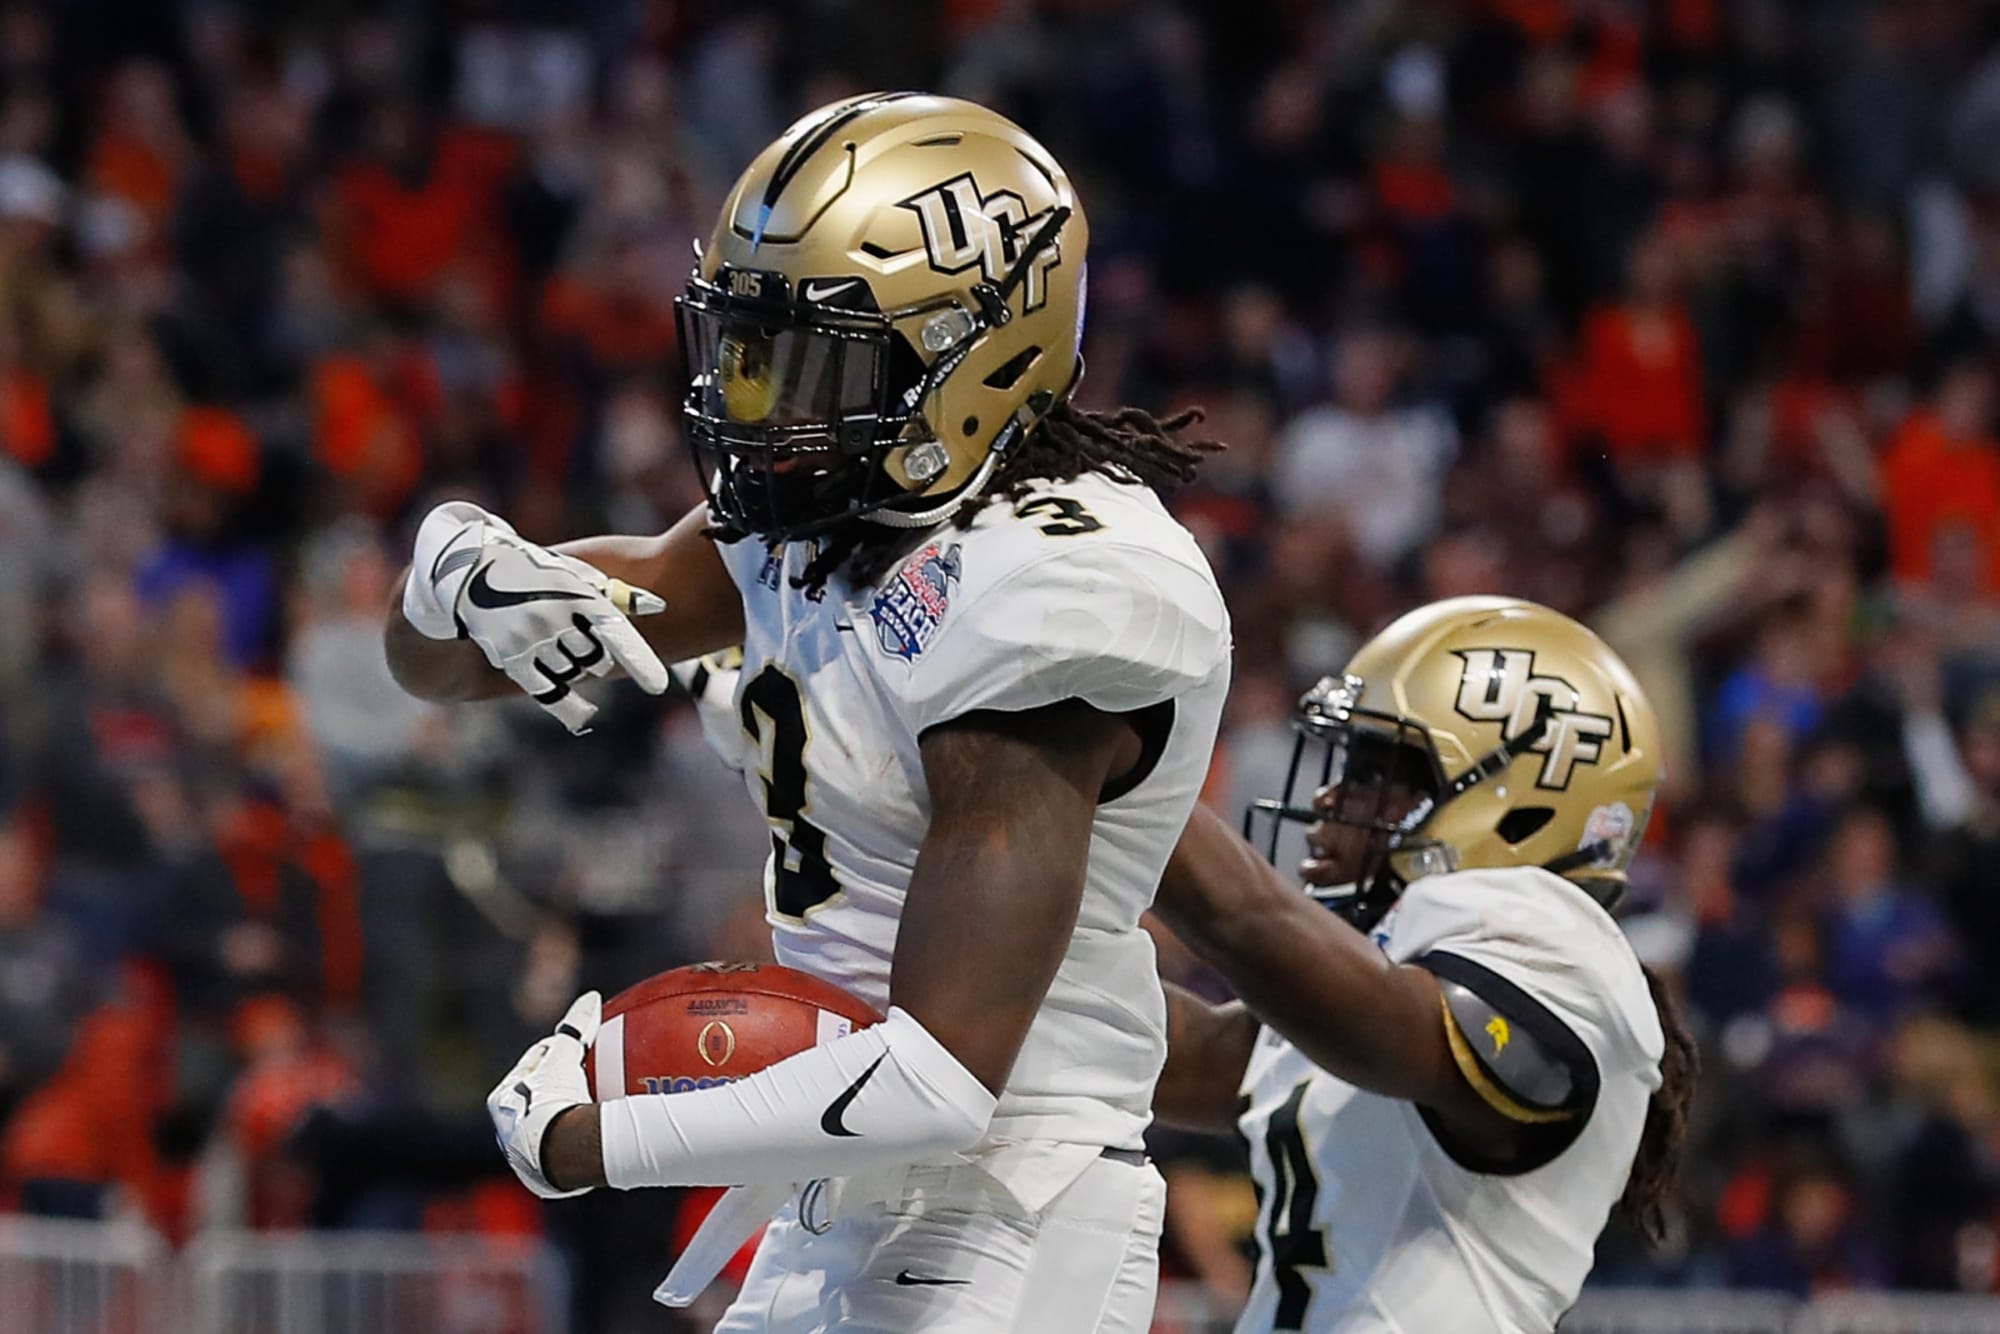 UCF Football: Is Knights #39 schedule stronger without North Carolina game?